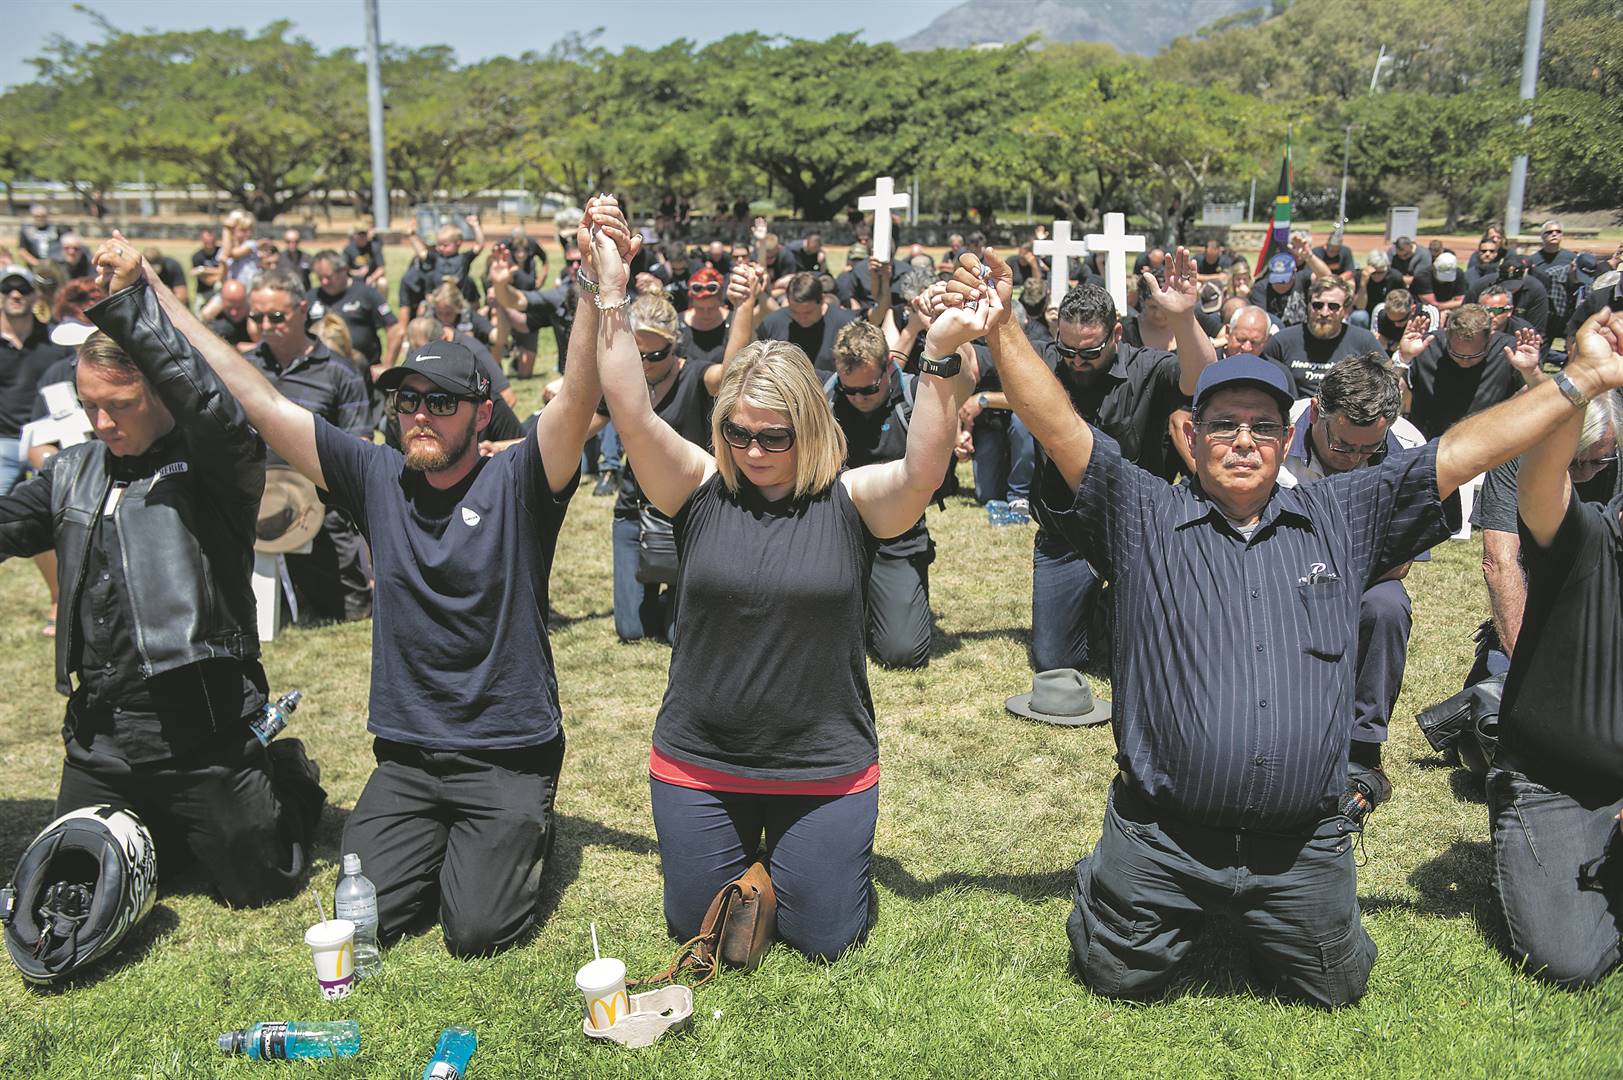 In 2017 in Cape Town, hundreds of farmers and community members gathered to protest against farm murders. Some displayed the apartheid-era SA flag, which has now been banned. Picture: Gallo Images / Netwerk24 / Jaco Marais